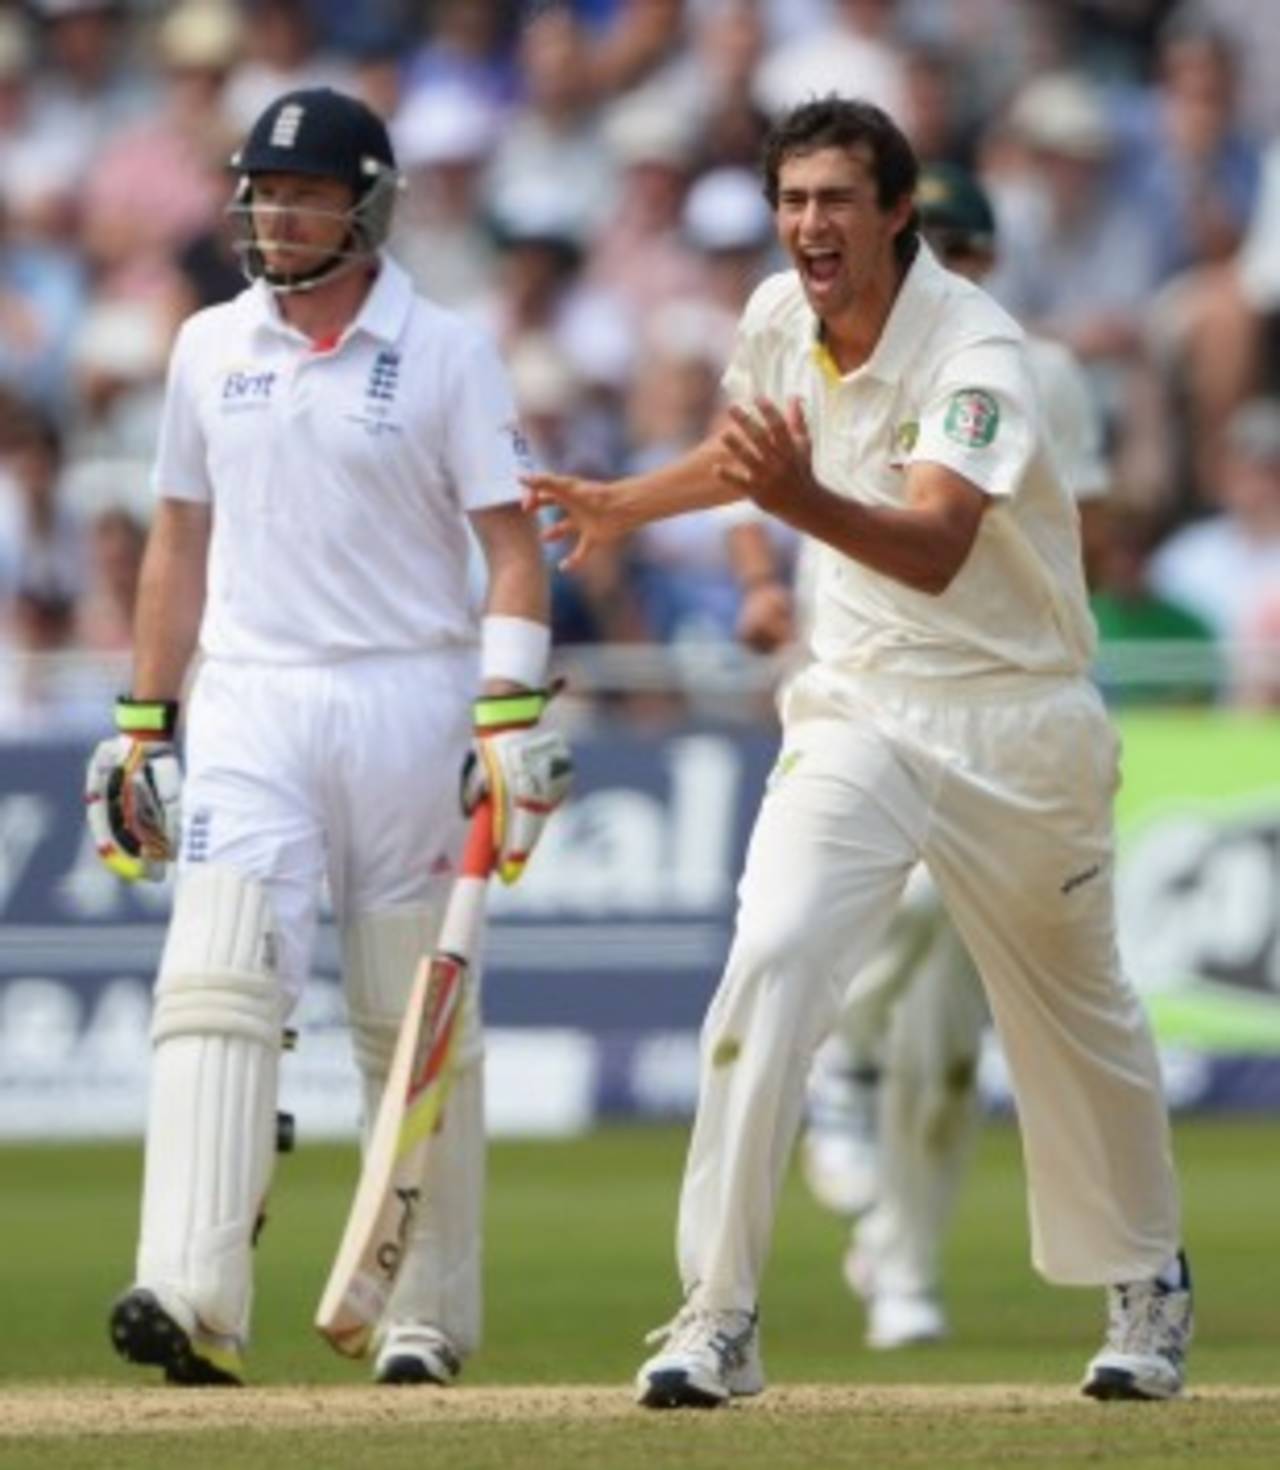 After his success with the bat, Ashton Agar teased with the ball and, as a whole, Australia deserved more&nbsp;&nbsp;&bull;&nbsp;&nbsp;Getty Images